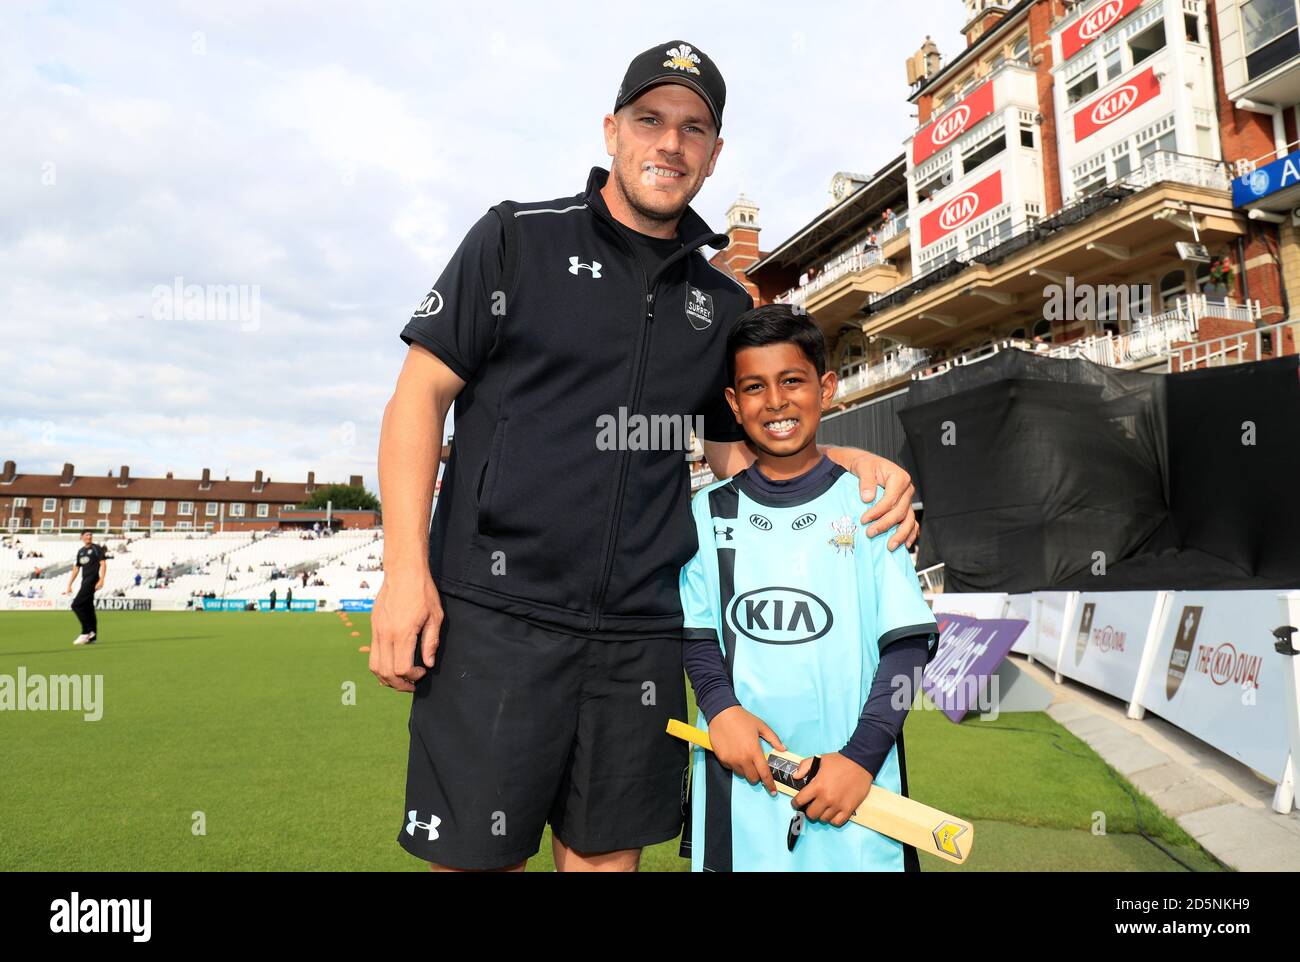 Surrey's Aaron Finch poses with a young mascot prior to the match. Stock Photo